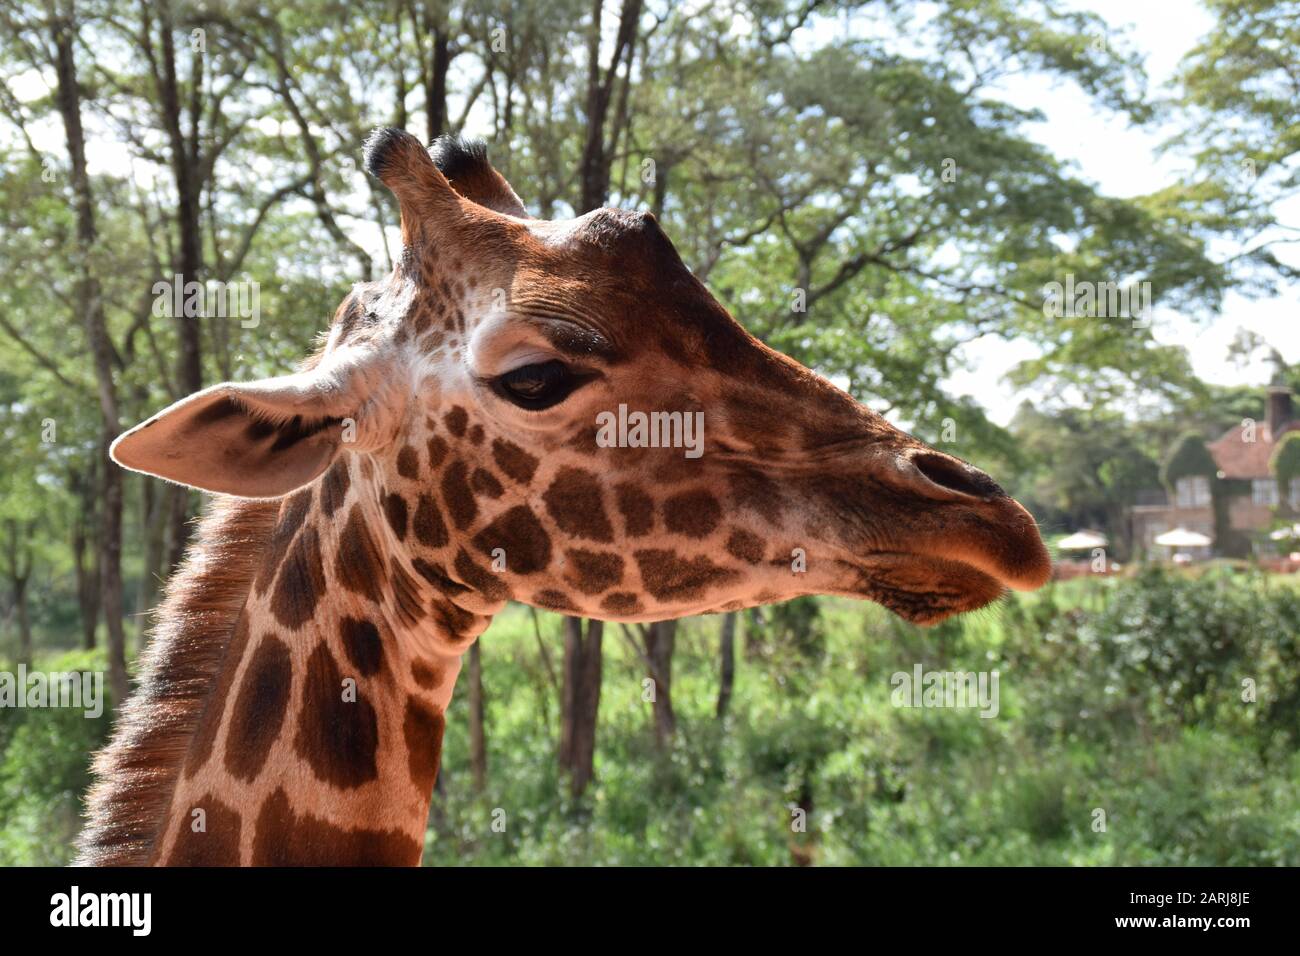 Close up and side view of a maasai giraffe s head taken at eye level Stock Photo